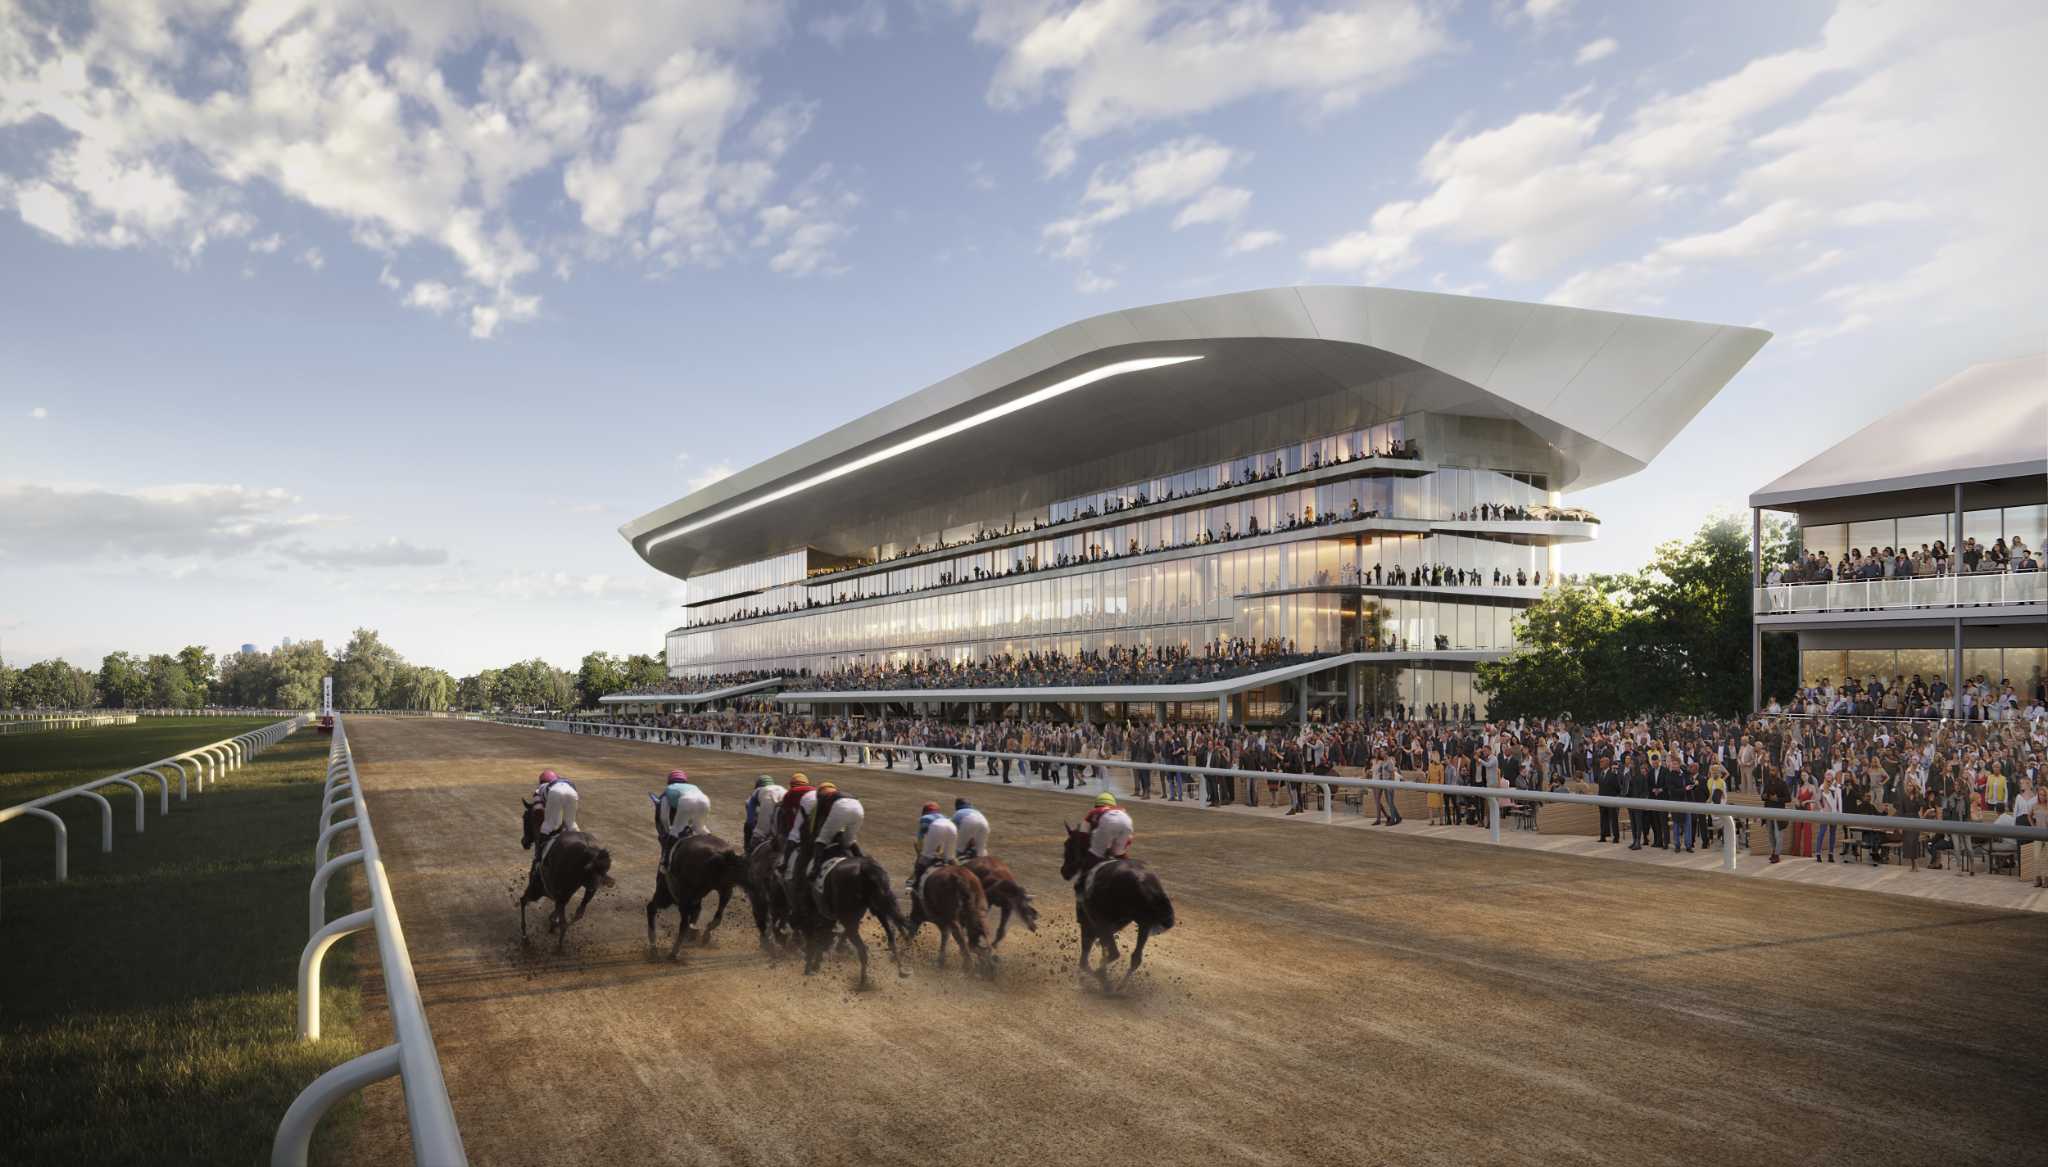 New York sets a timeline for the Belmont Park project that is set to be